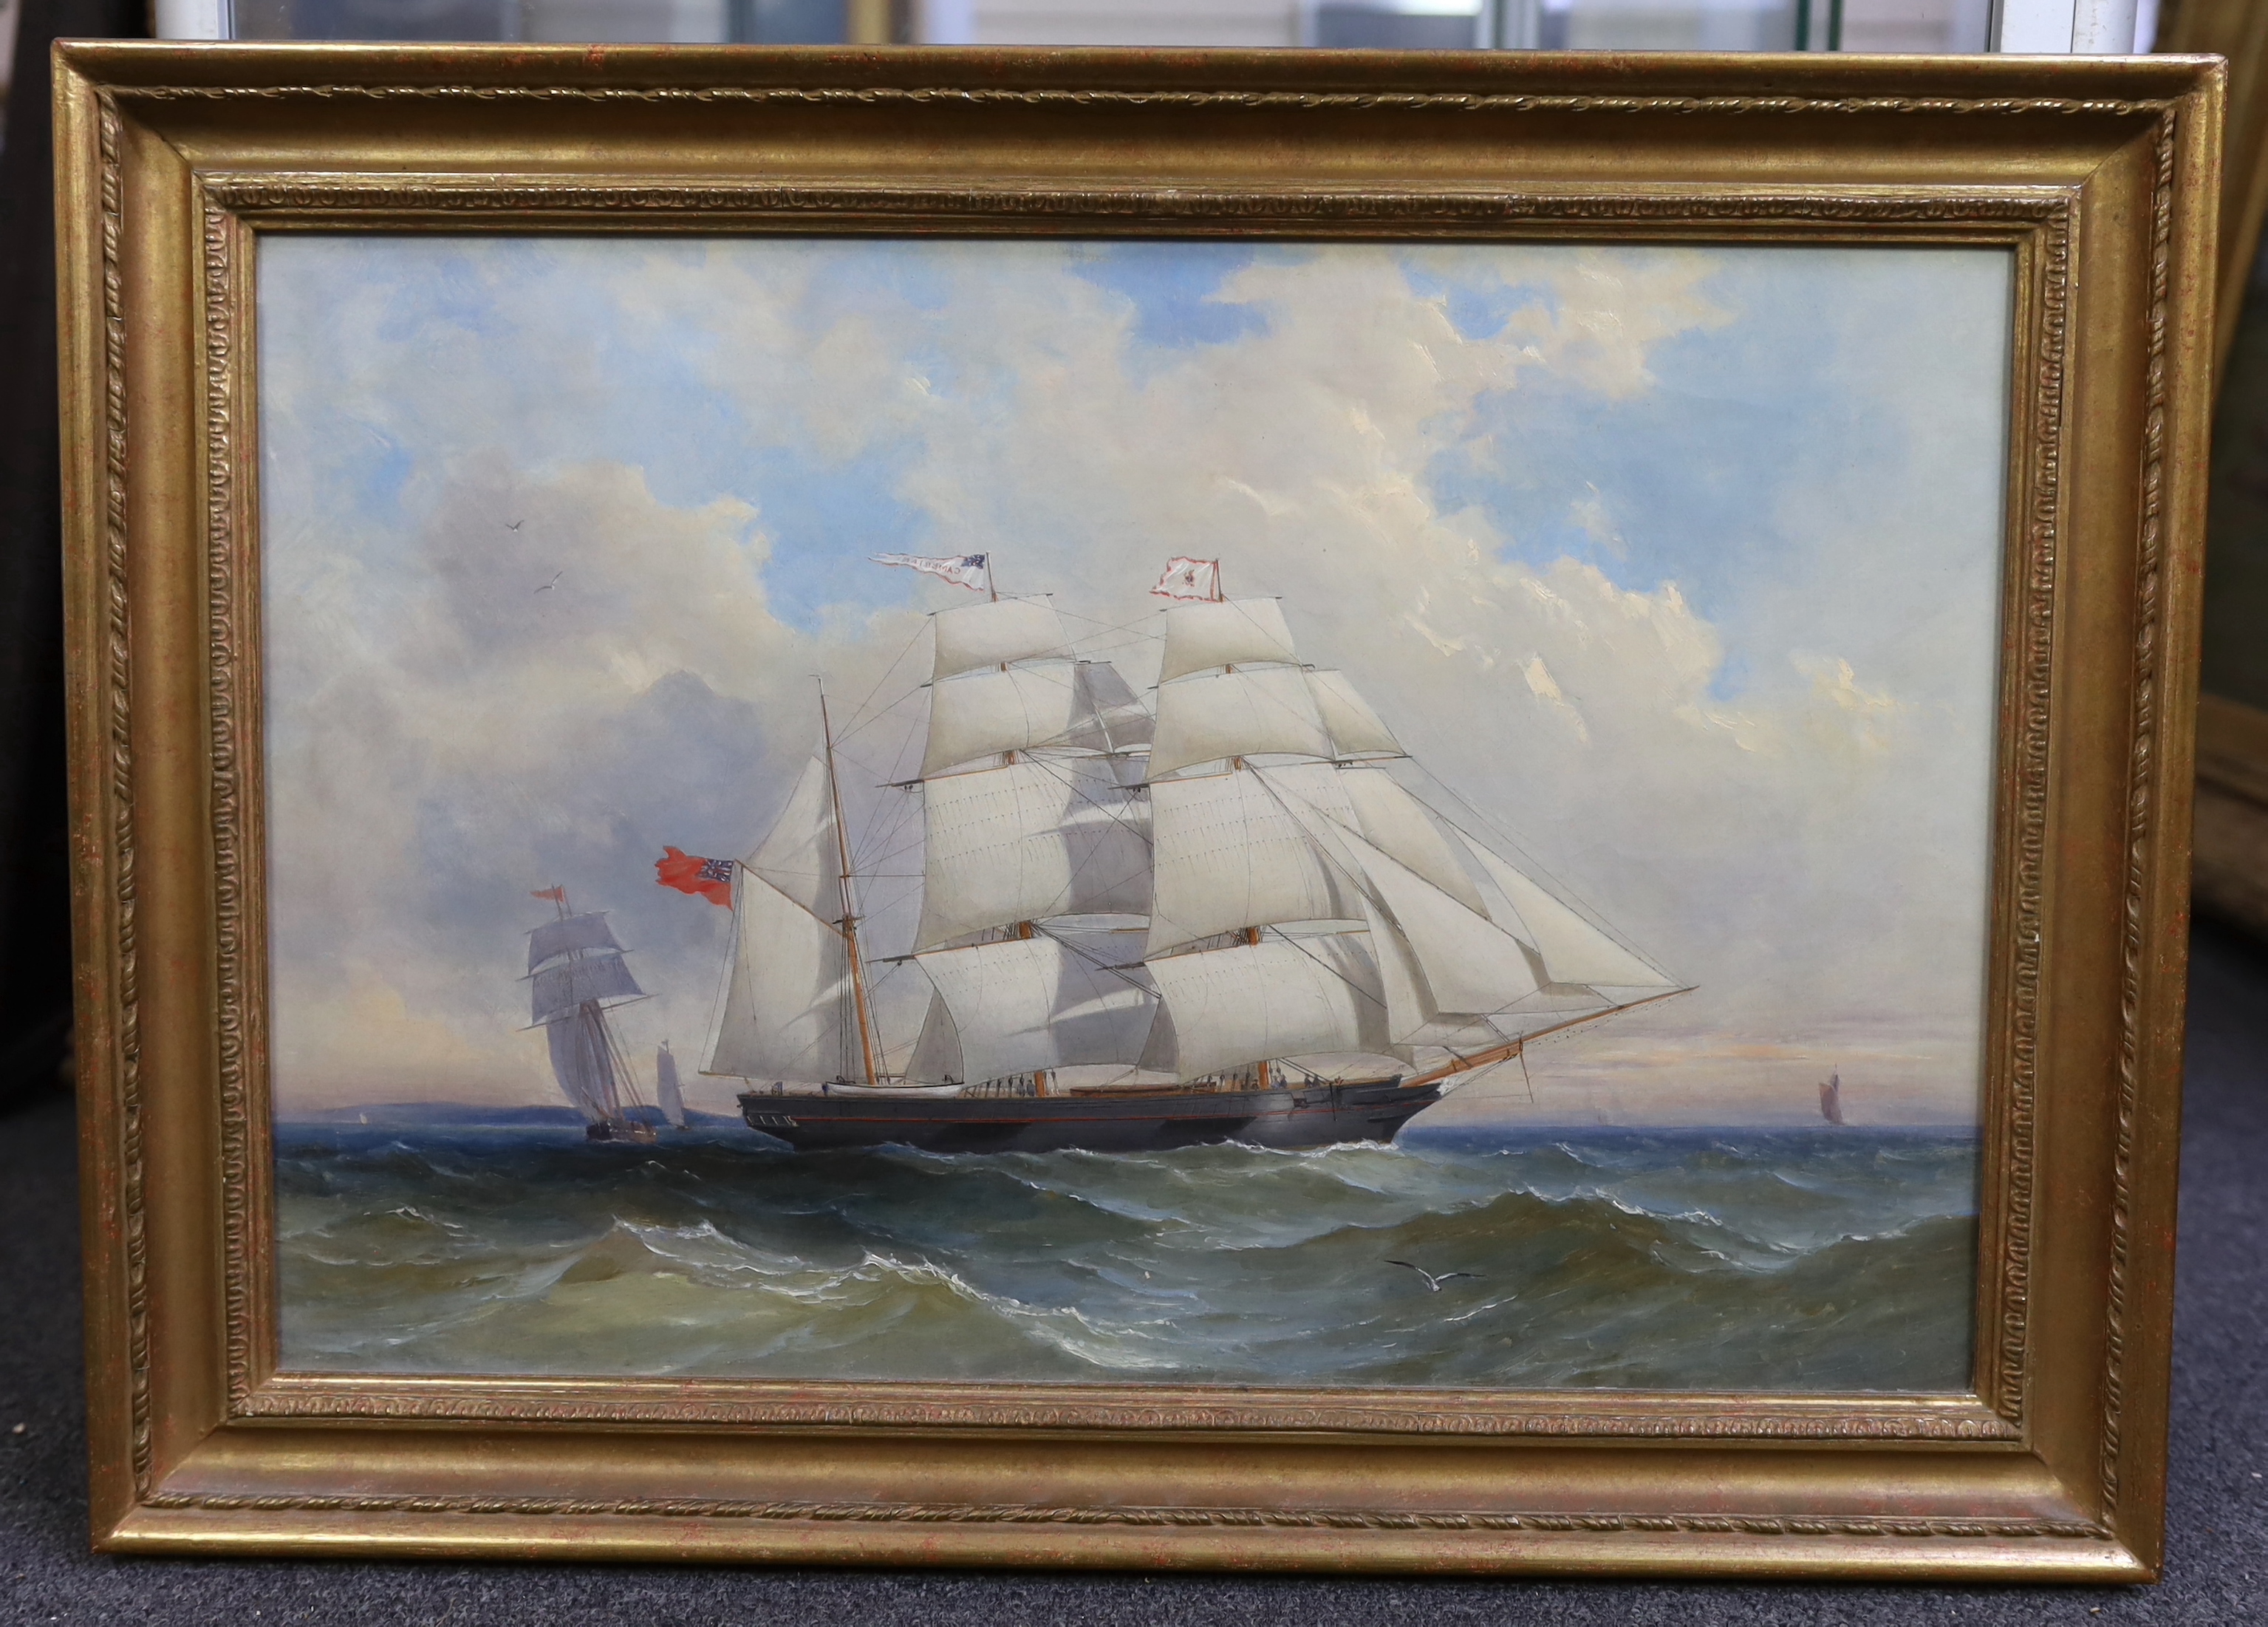 Attributed to Charles Gregory RWS (English, 1849-1920), oil on canvas, 'The barque Cambria', 35 x 52cm